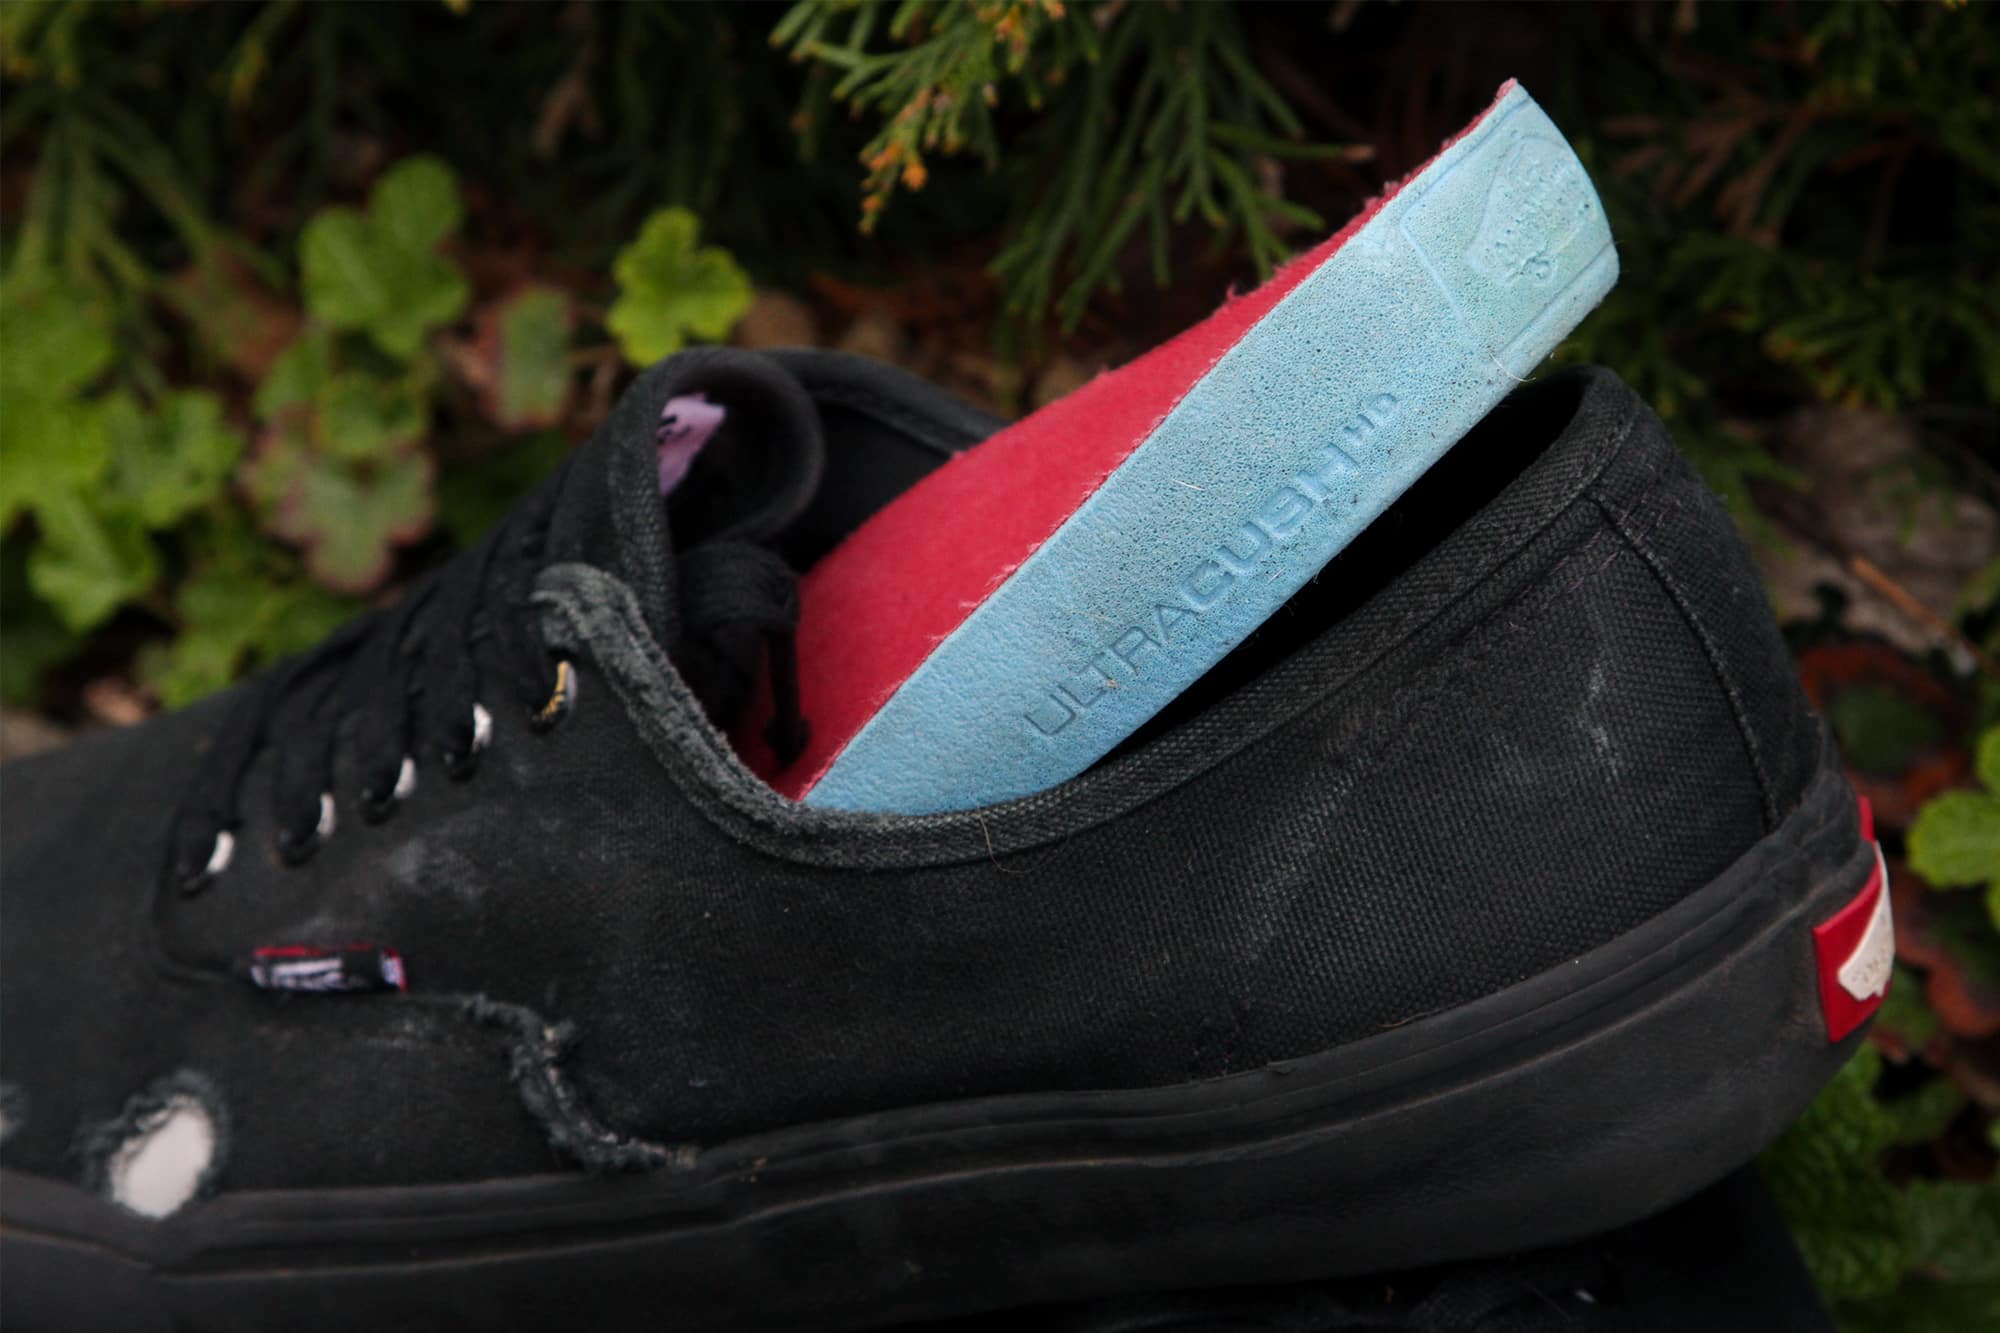 best replacement insoles for vans